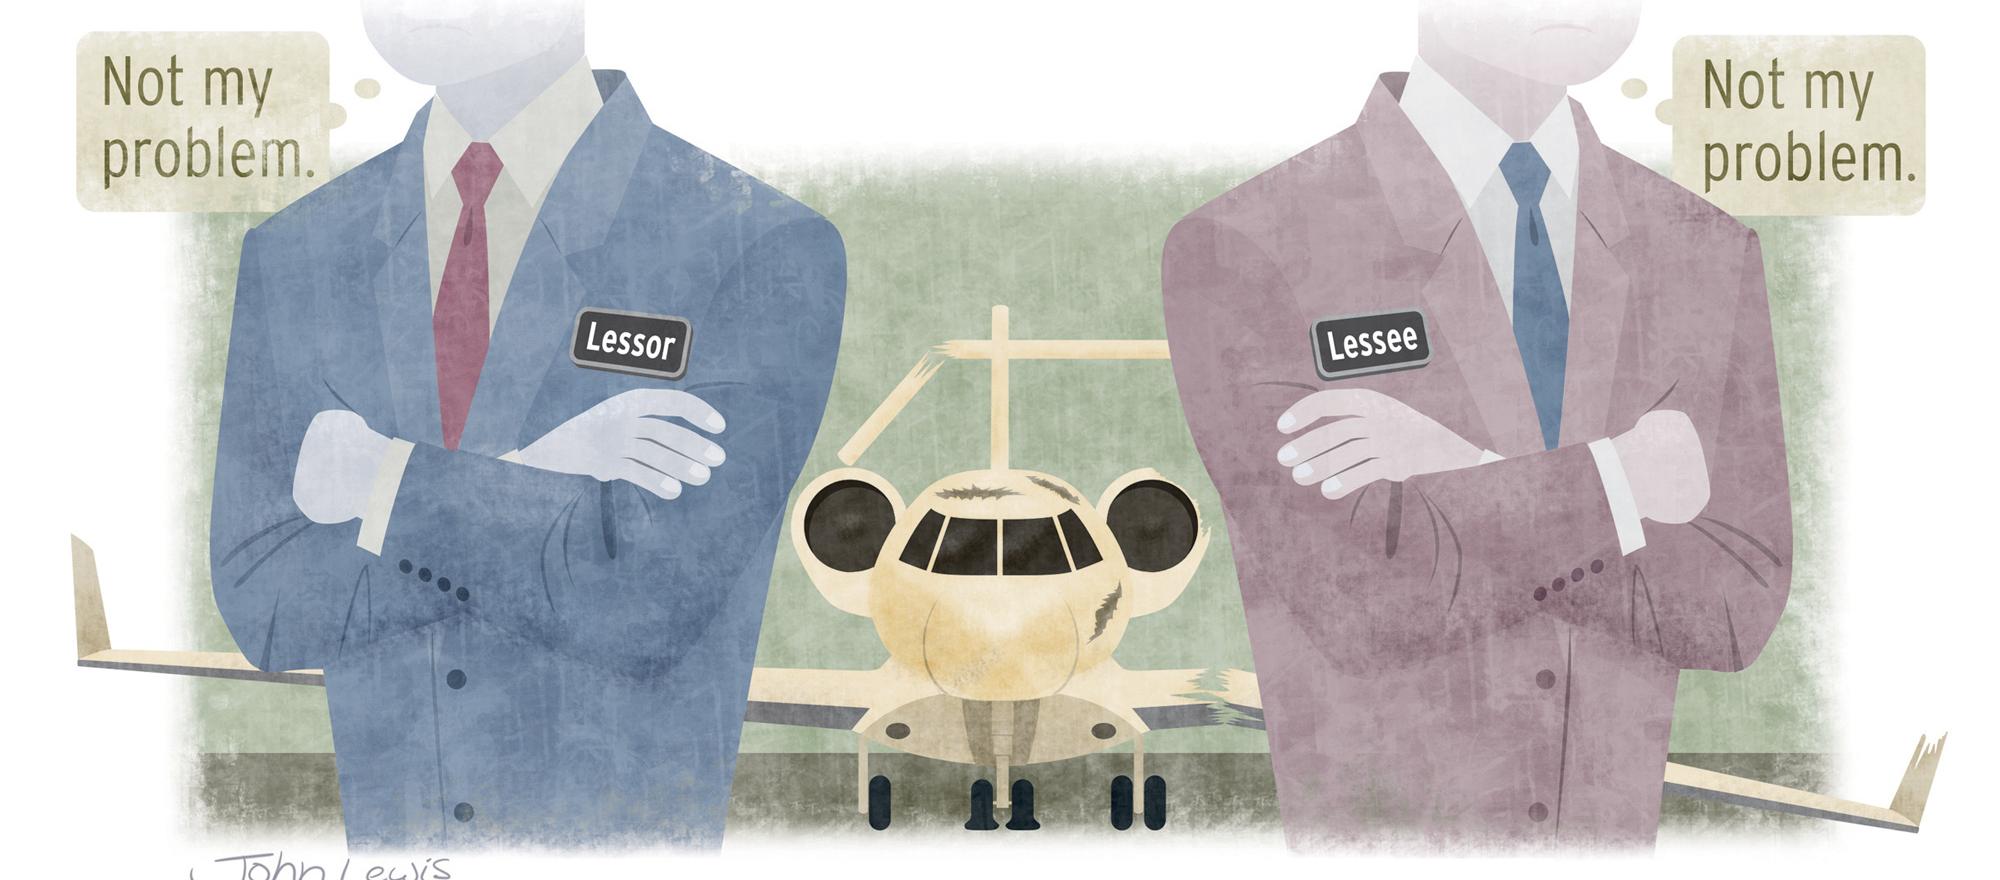 Buyers who face long waits for a new airplane may consider leasing on a short-term basis. (Illustration: John Lewis)